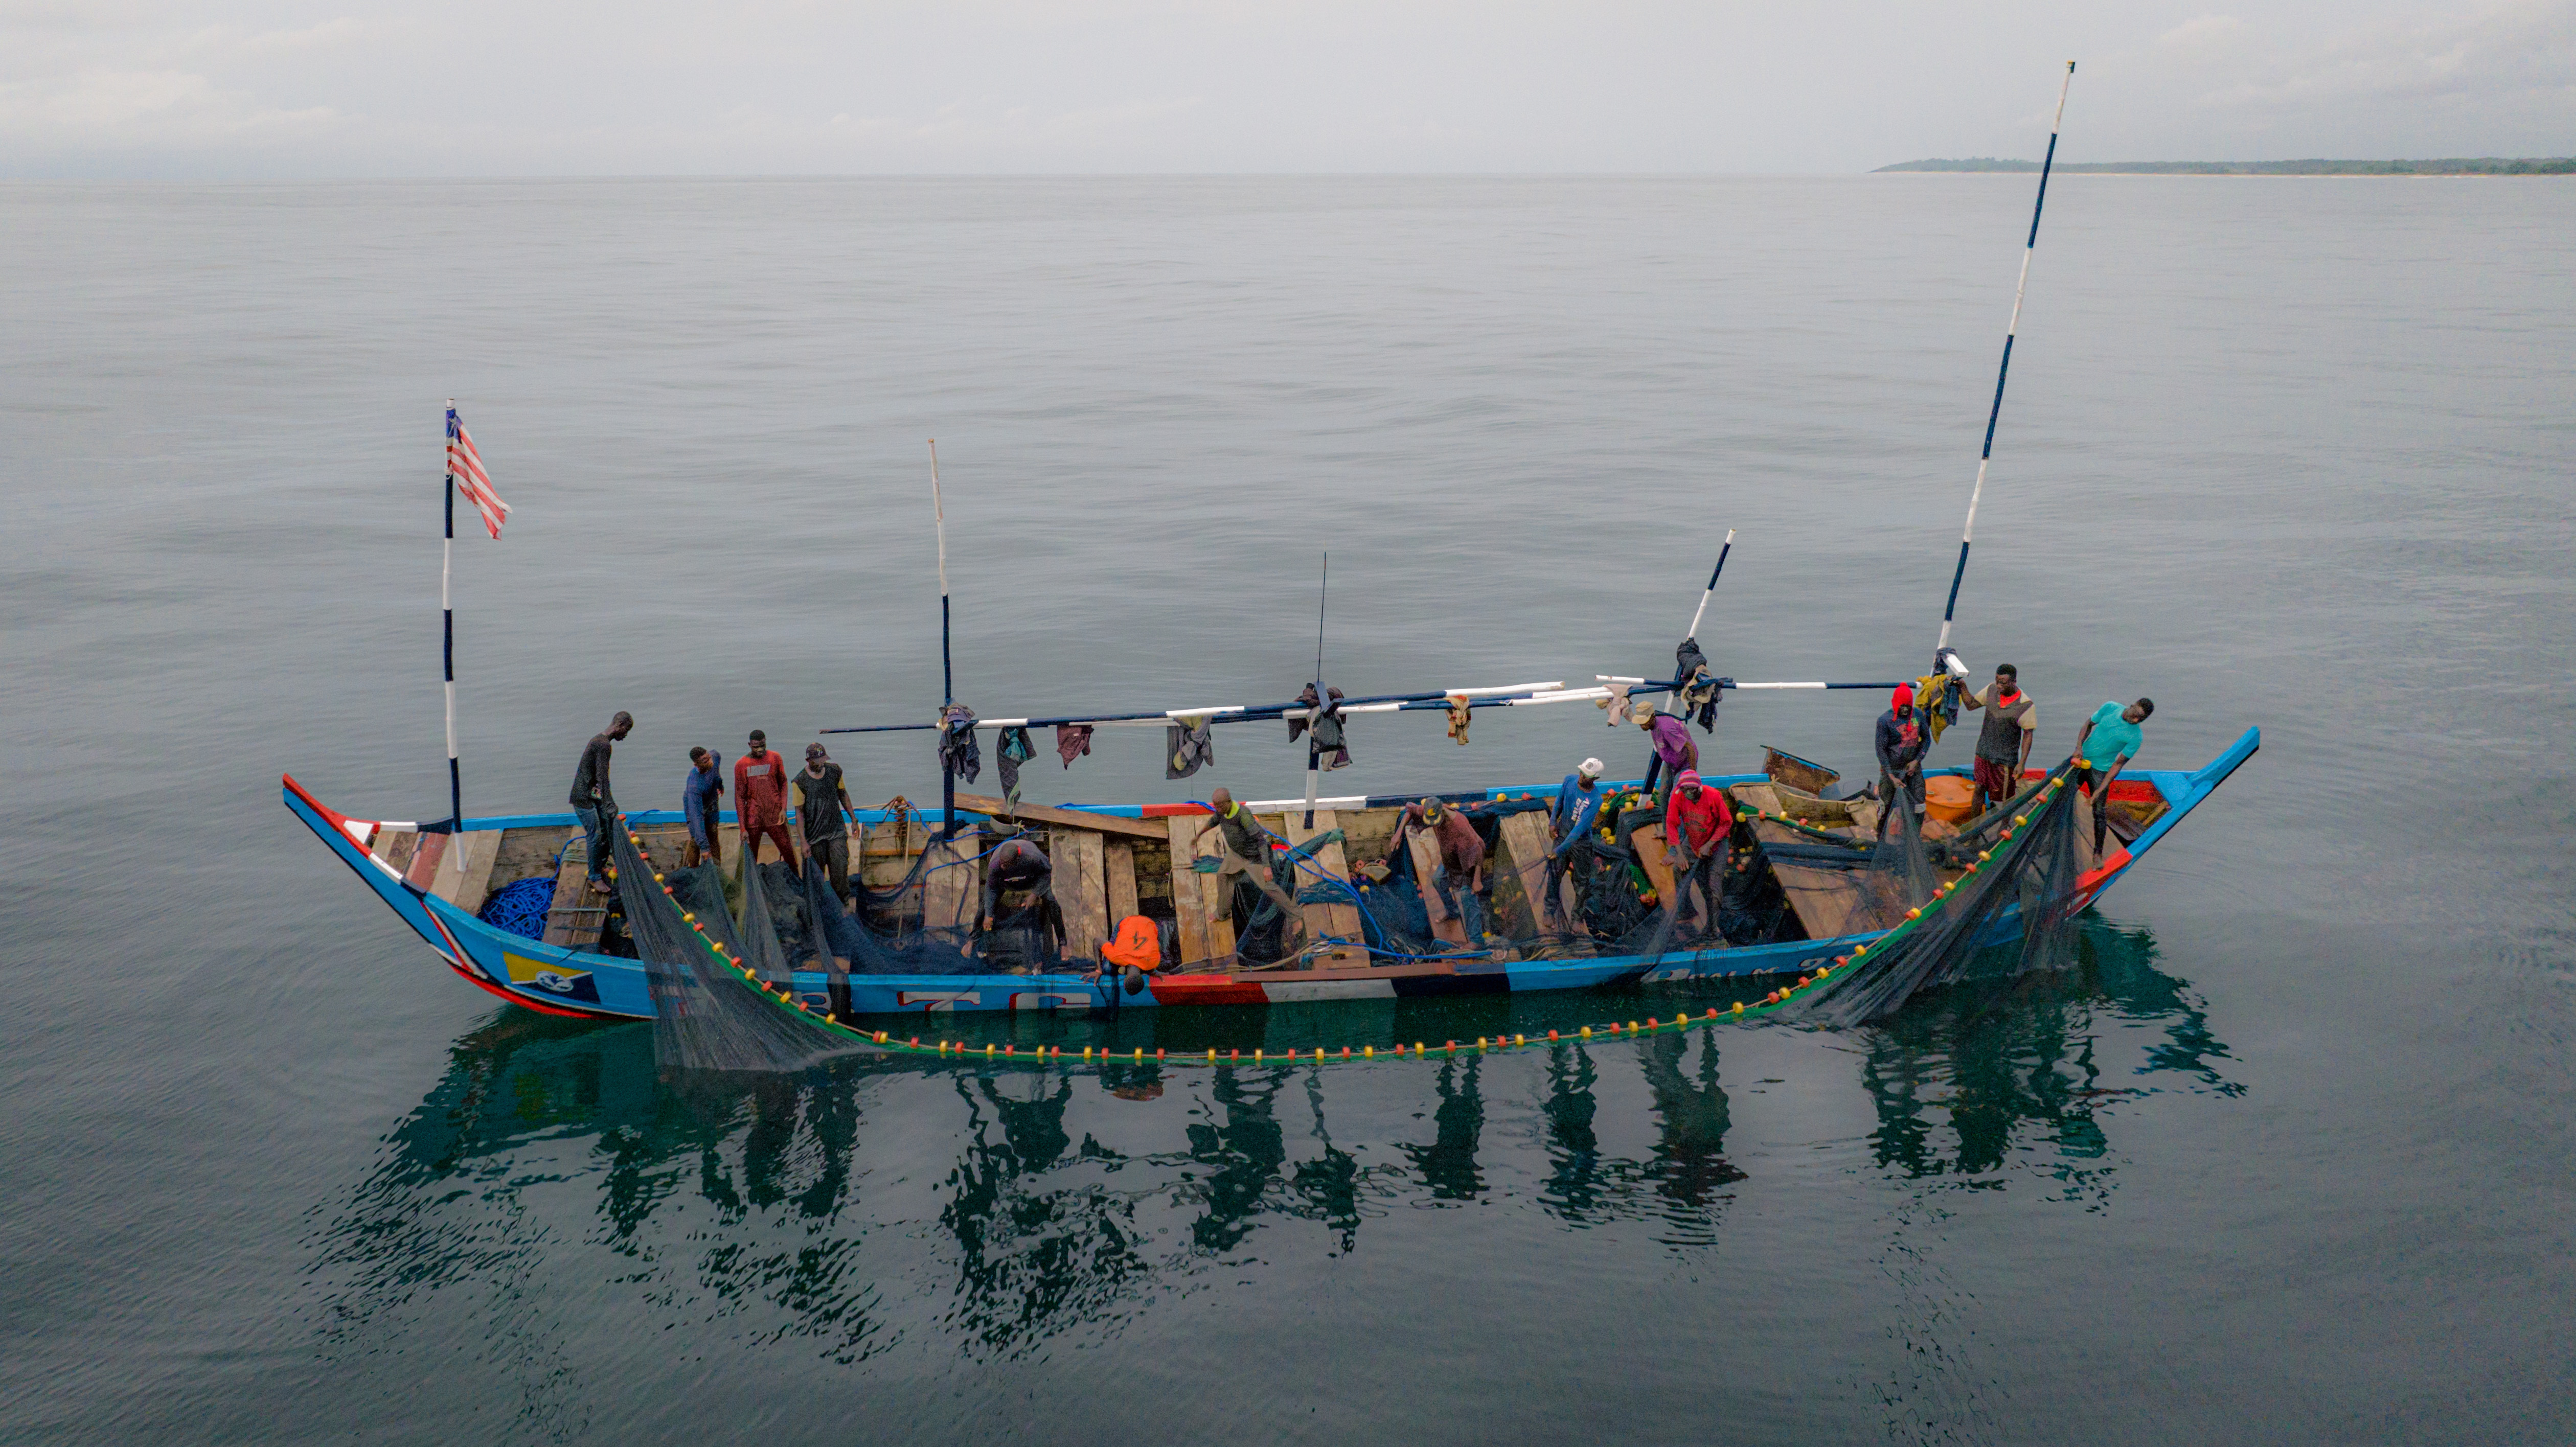 Community participation for the future of global fisheries